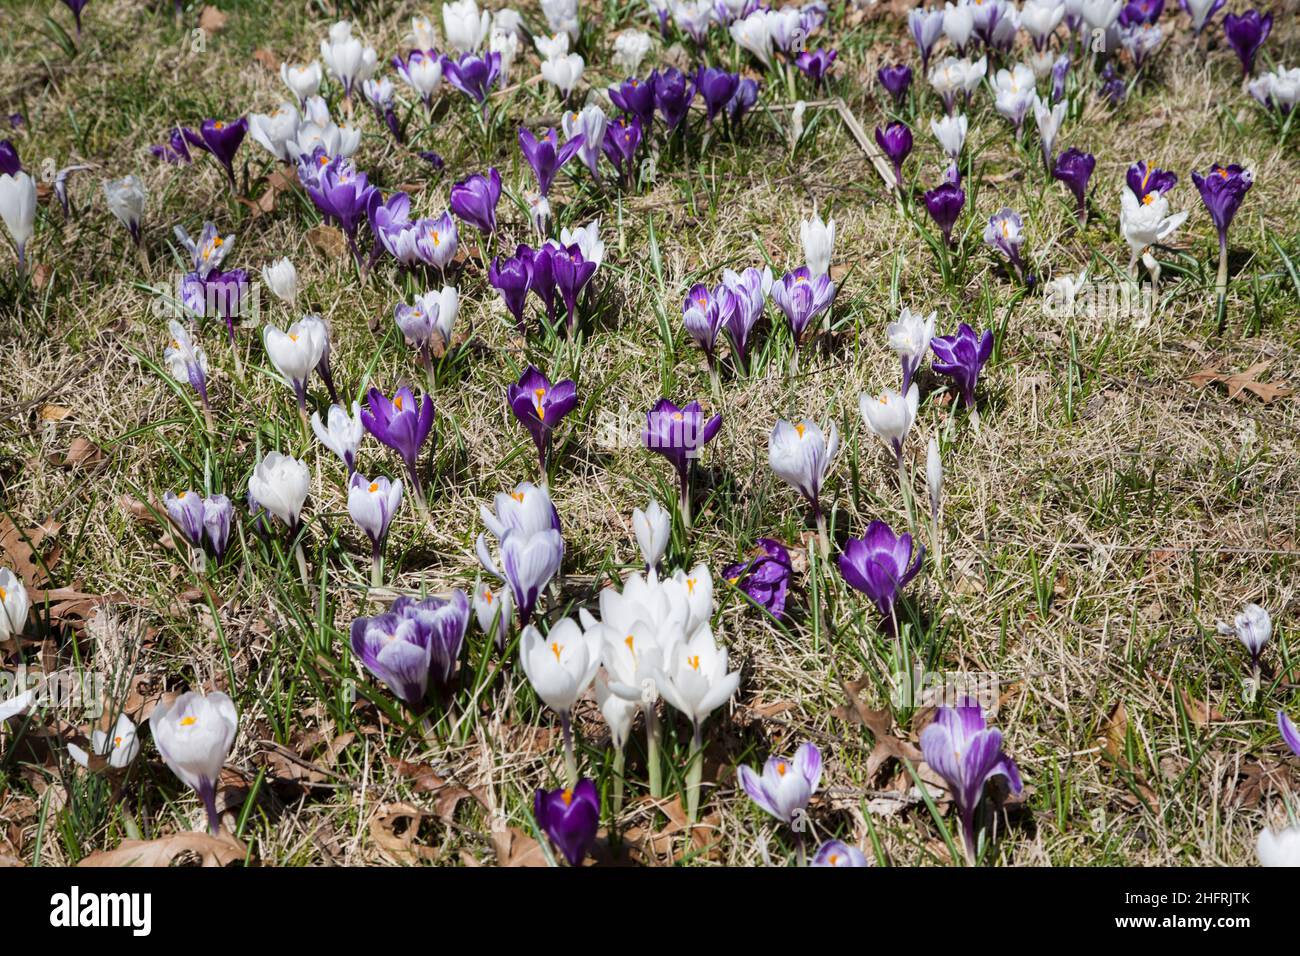 Naturalized spring crocus flowers, Mercer County, New Jersey, NJ,  USA, US front garden Stock Photo